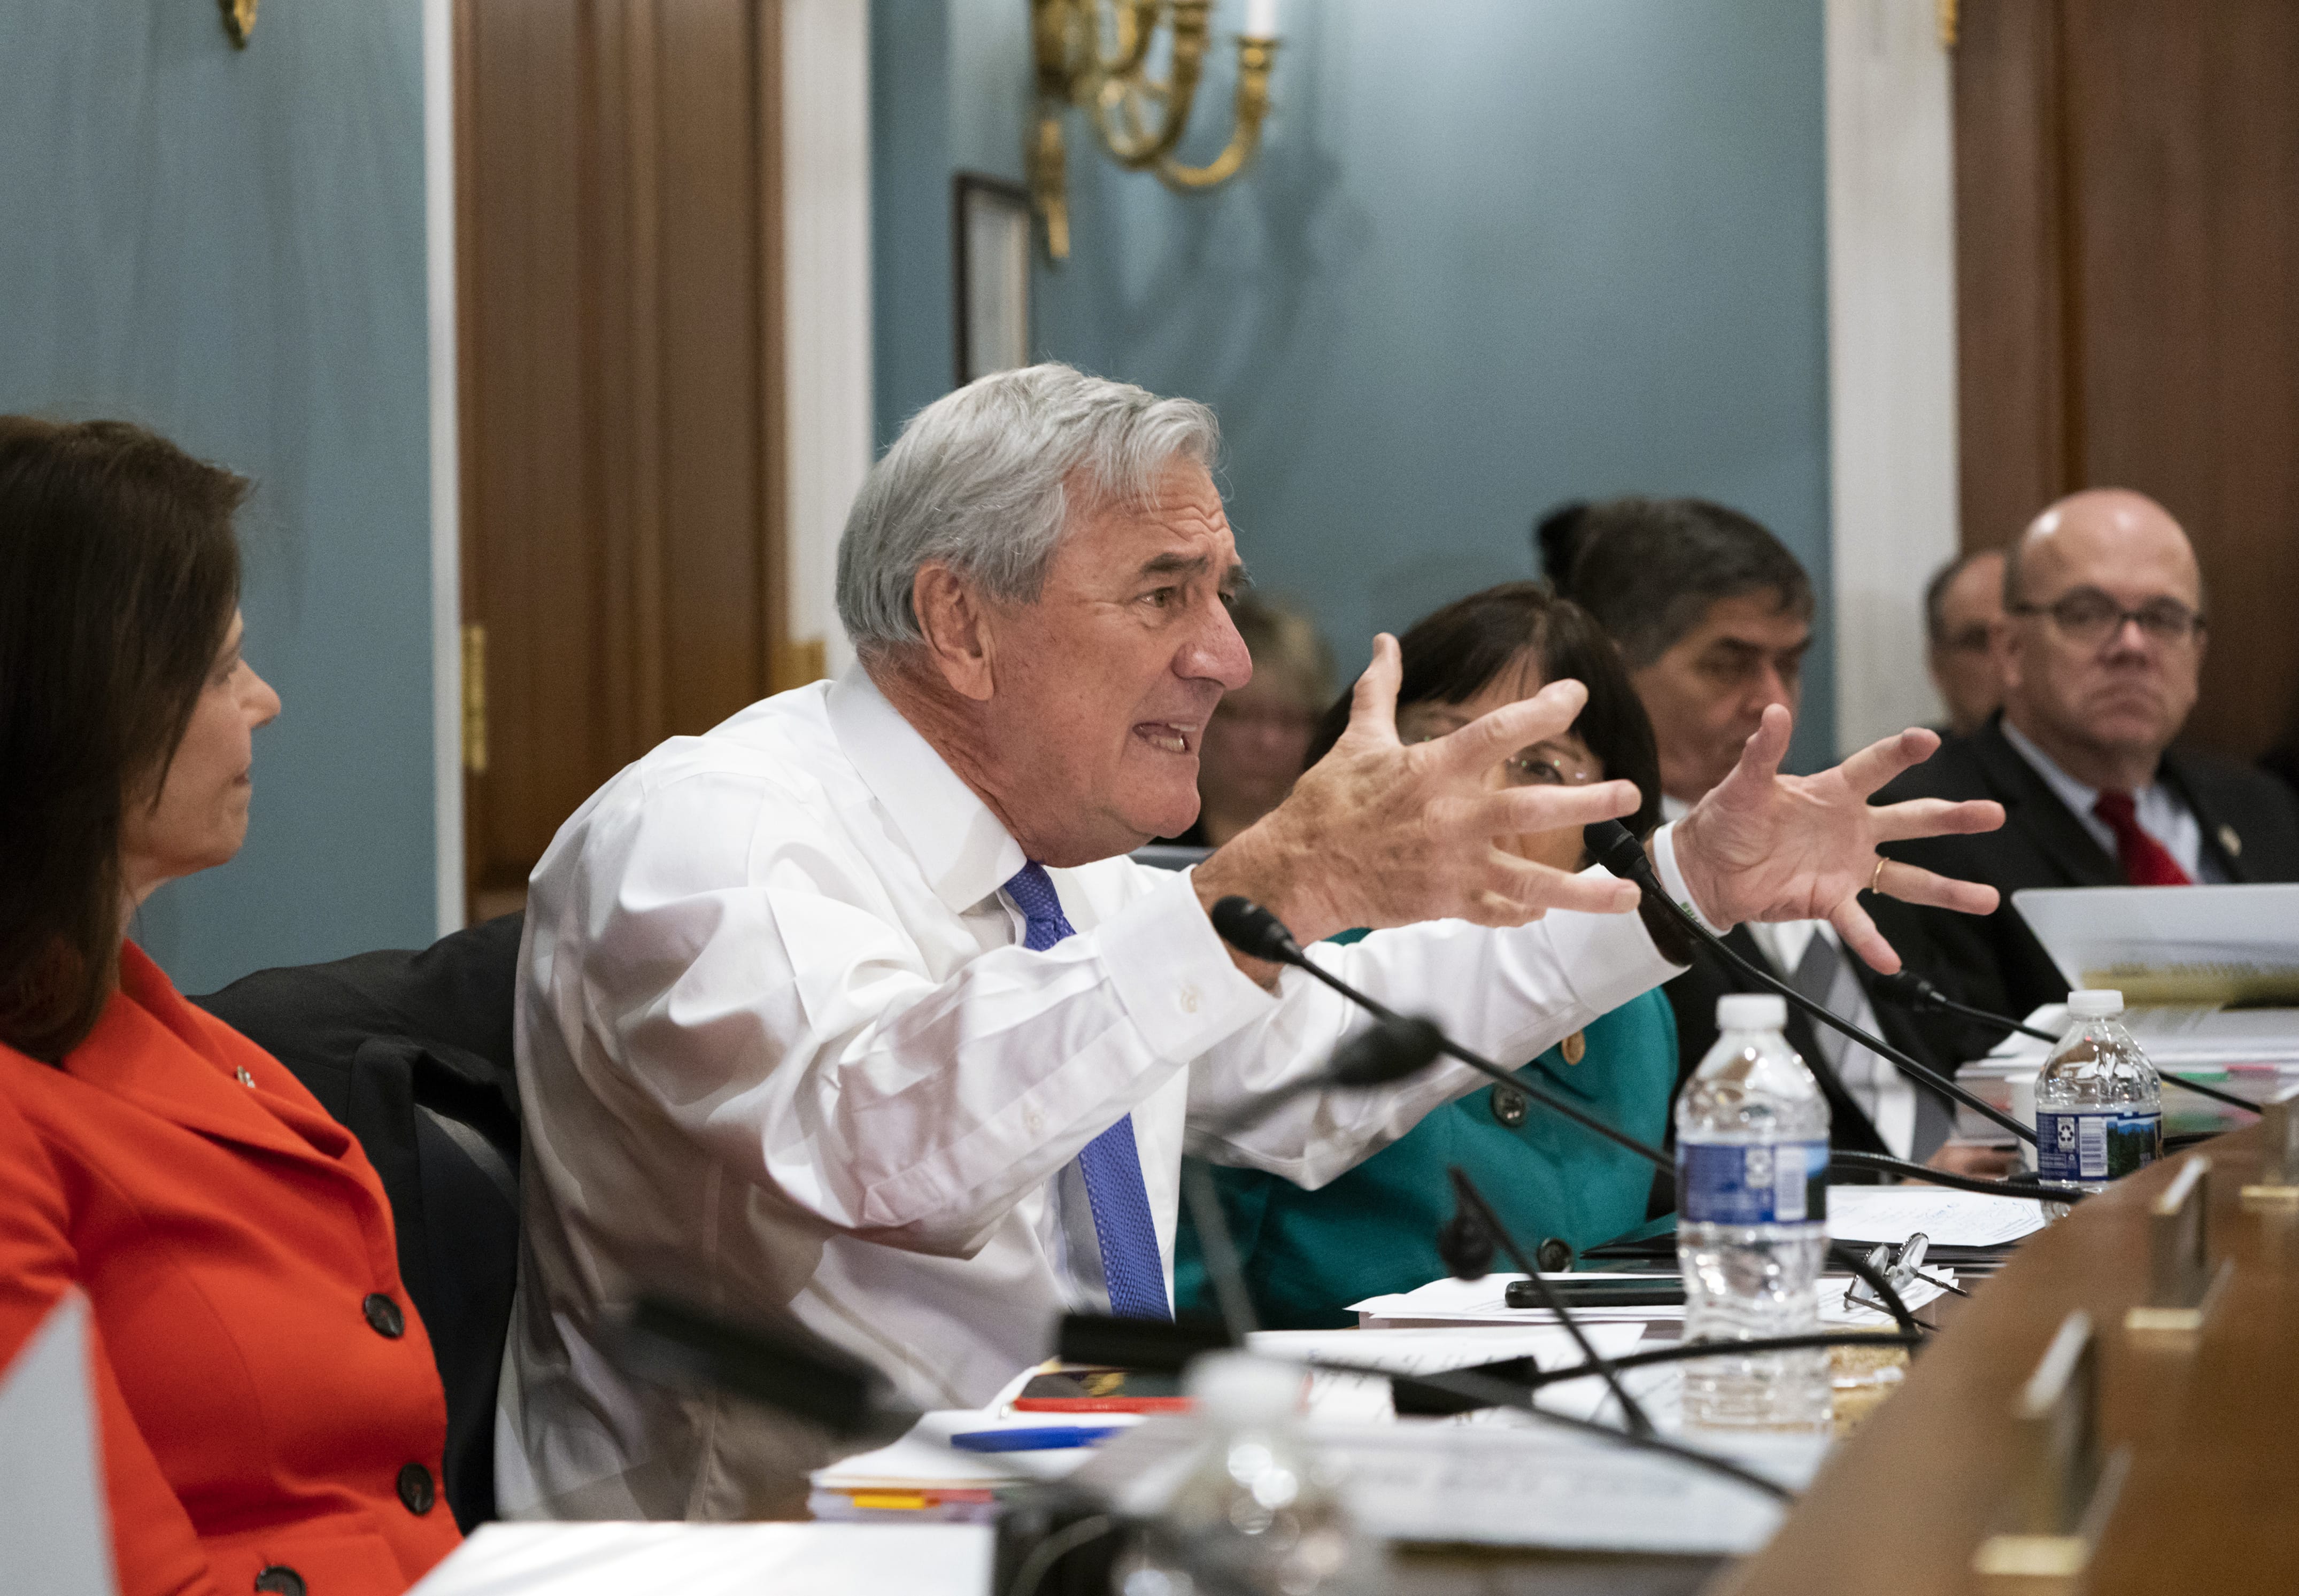 Rep. Richard Nolan, D-Minn., argues in opposition as members of the House Agriculture Committee assemble to craft a new farm bill which includes an overhaul of the food stamp program, officially known as the Supplemental Nutrition Assistance Program, or SNAP, on Capitol Hill in Washington, Wednesday, April 18, 2018. Republicans are proposing stricter work mandates on the nation's more than 40 million food stamp recipients. (AP Photo/J.